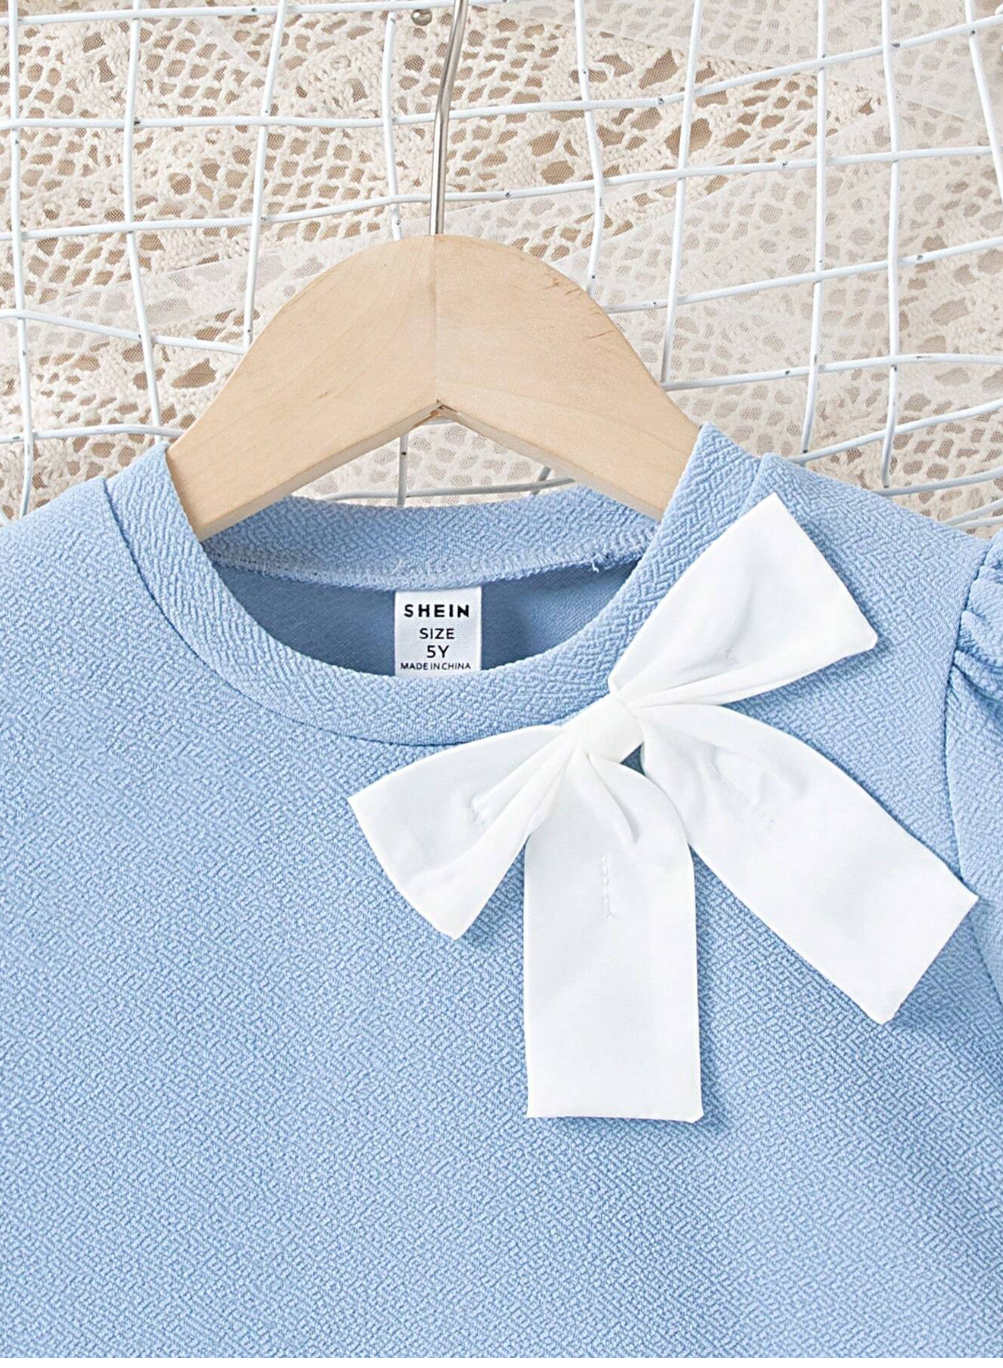 Chic Charm: Young Girls' Pleated Hem Dress with Bow Tie for Spring/Summer Elegance!